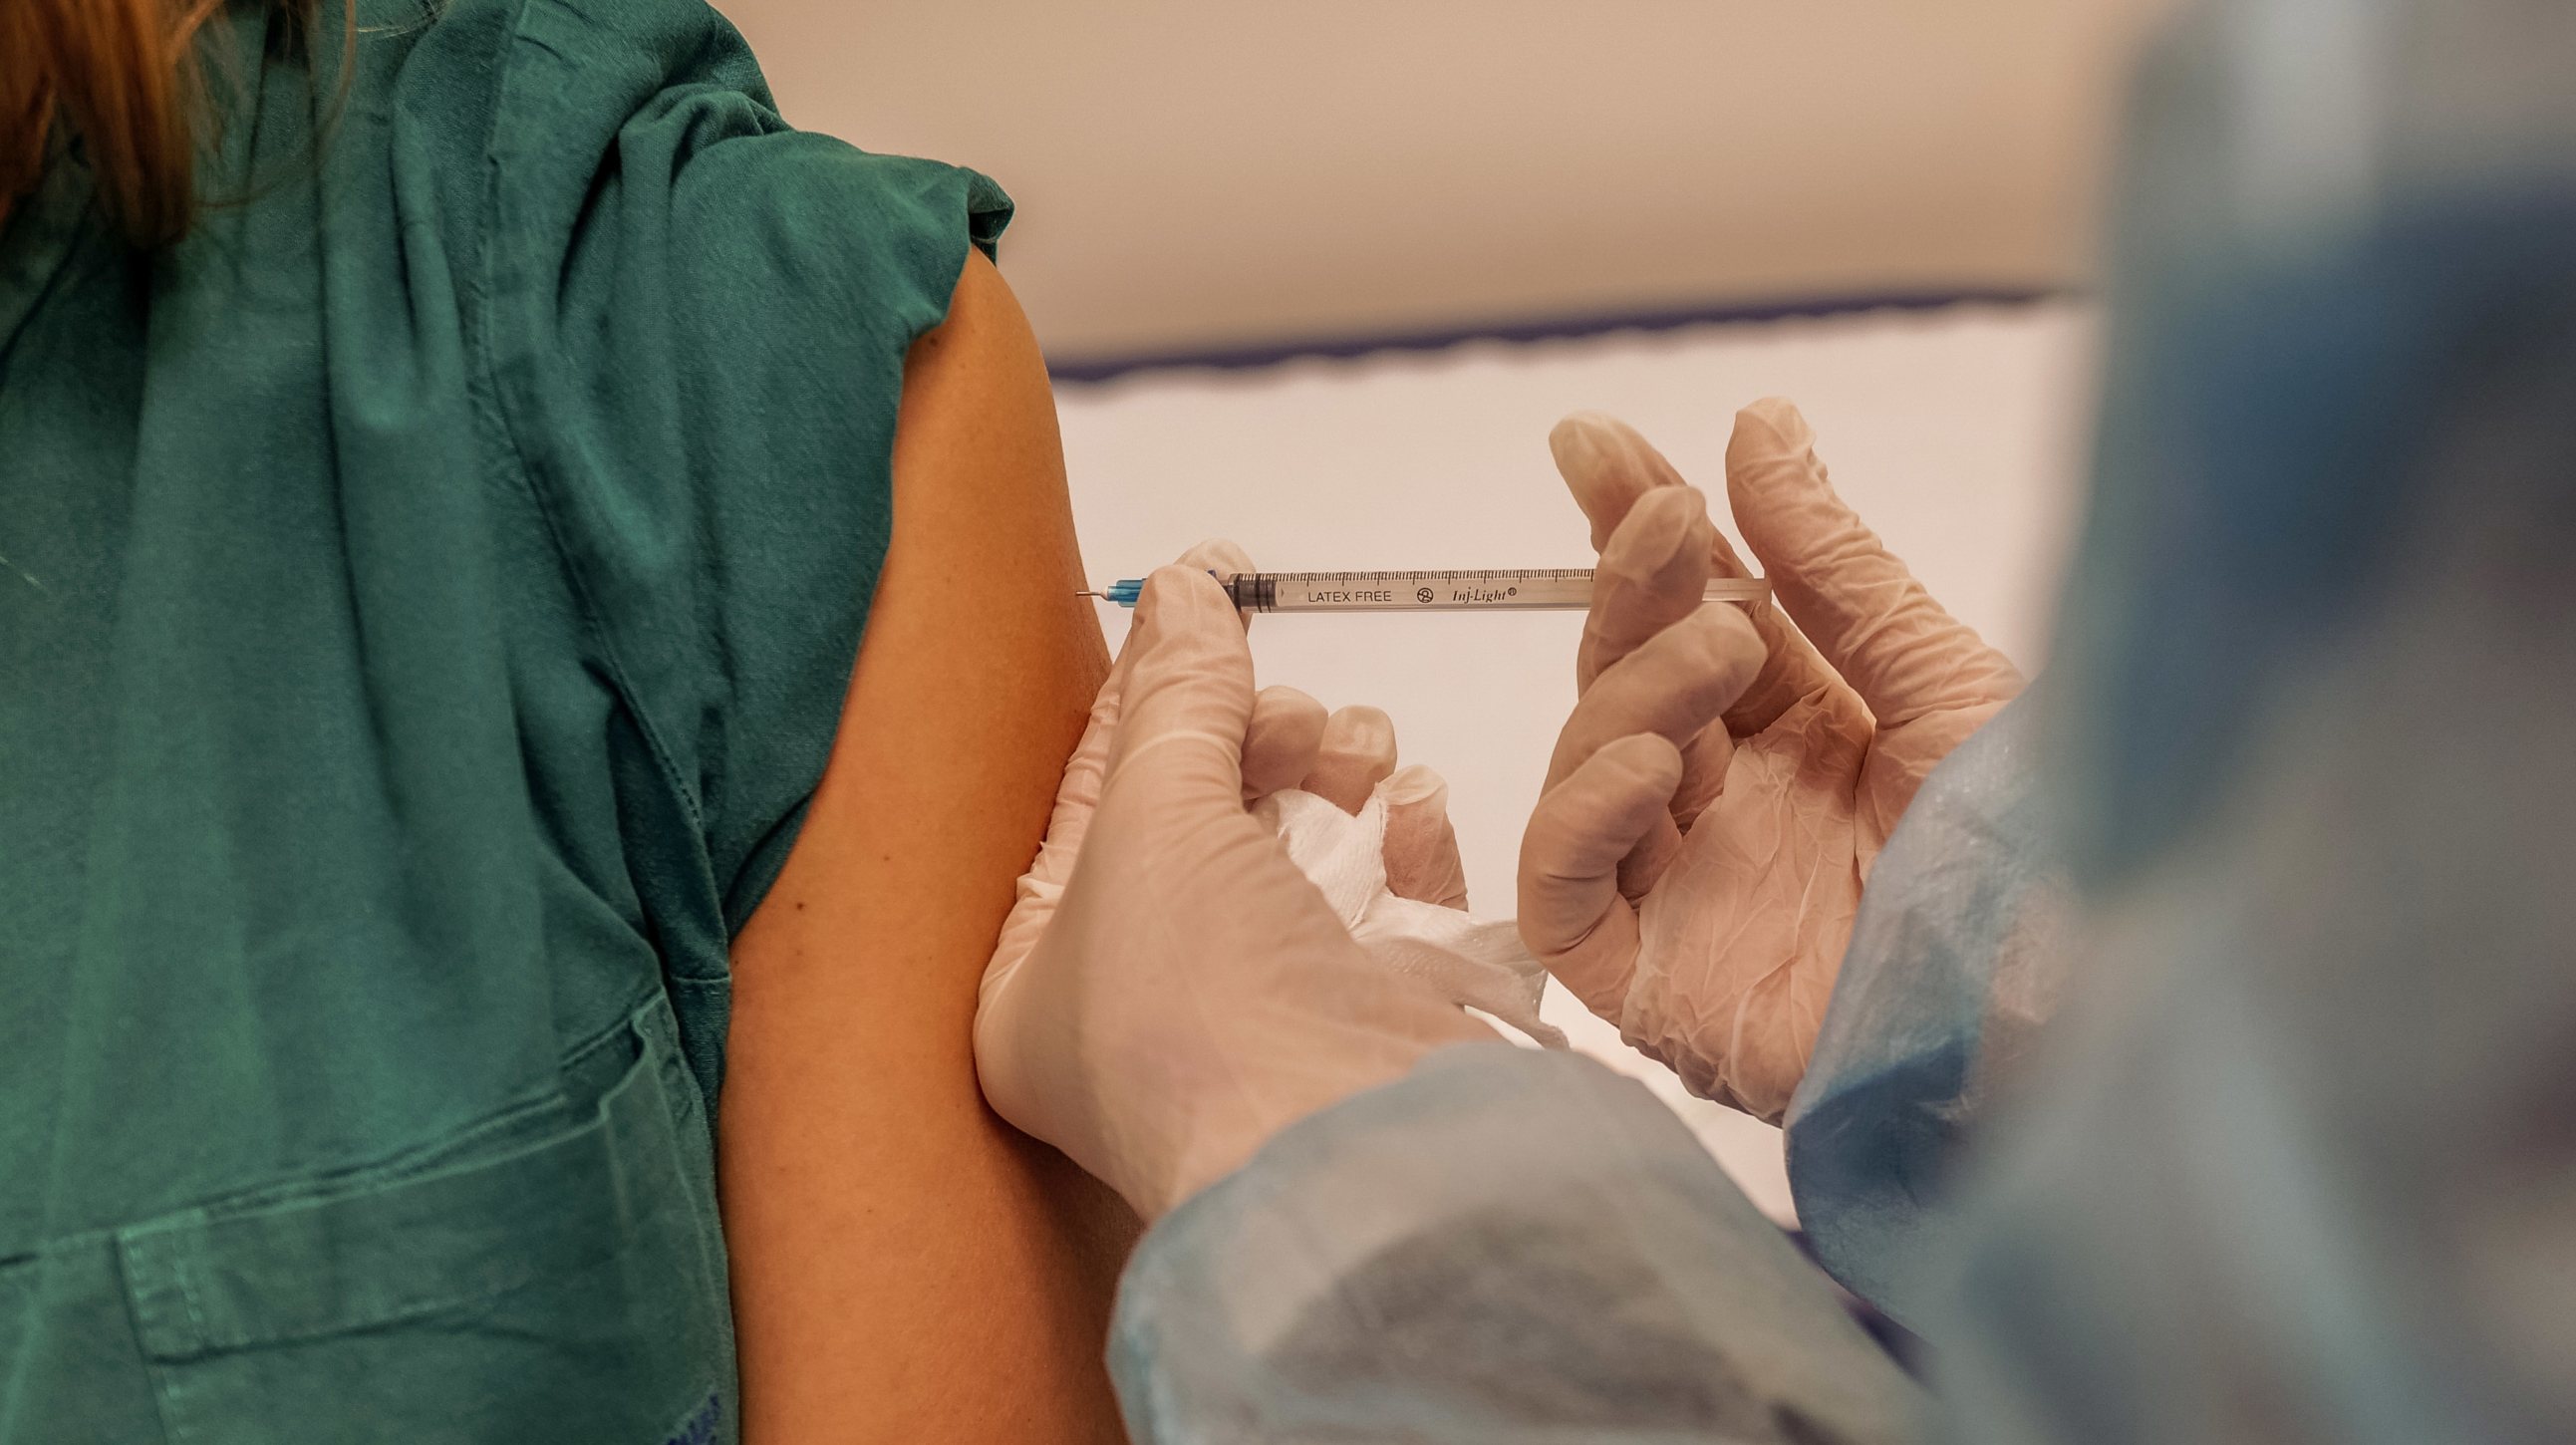 Portugal&#039;s Healthcare Workers Receive Covid-19 Vaccines